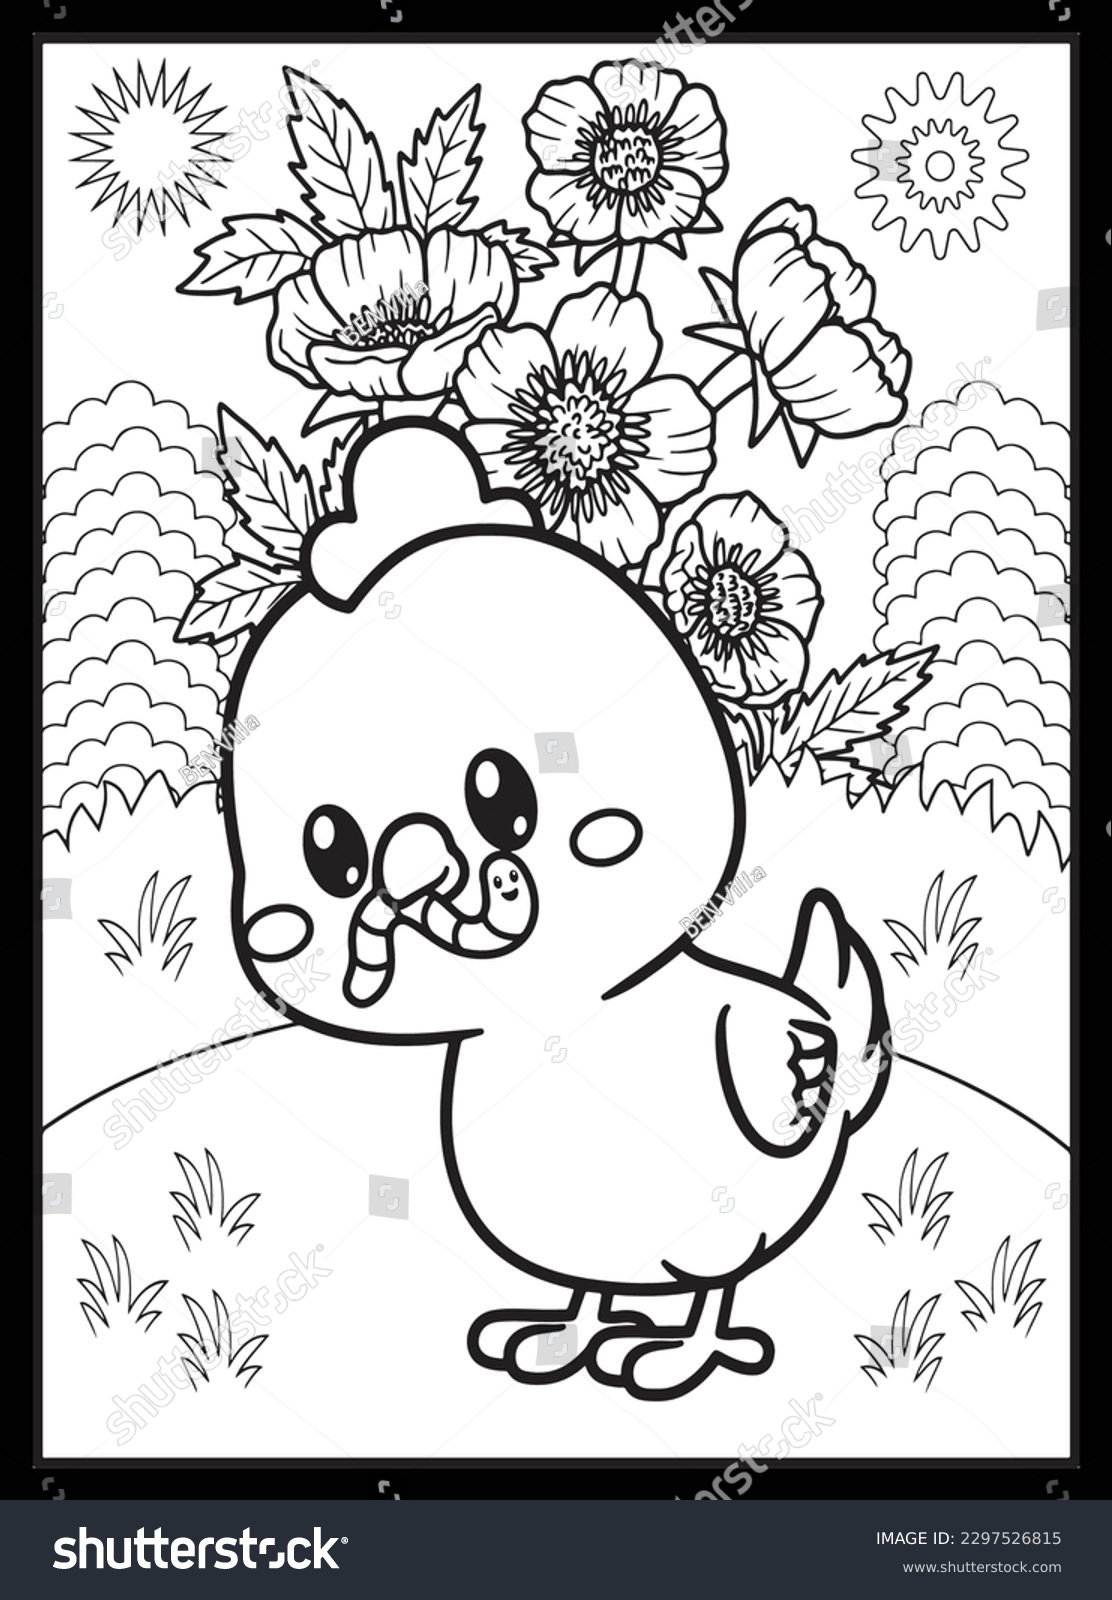 Farm animals coloring pages kids stock